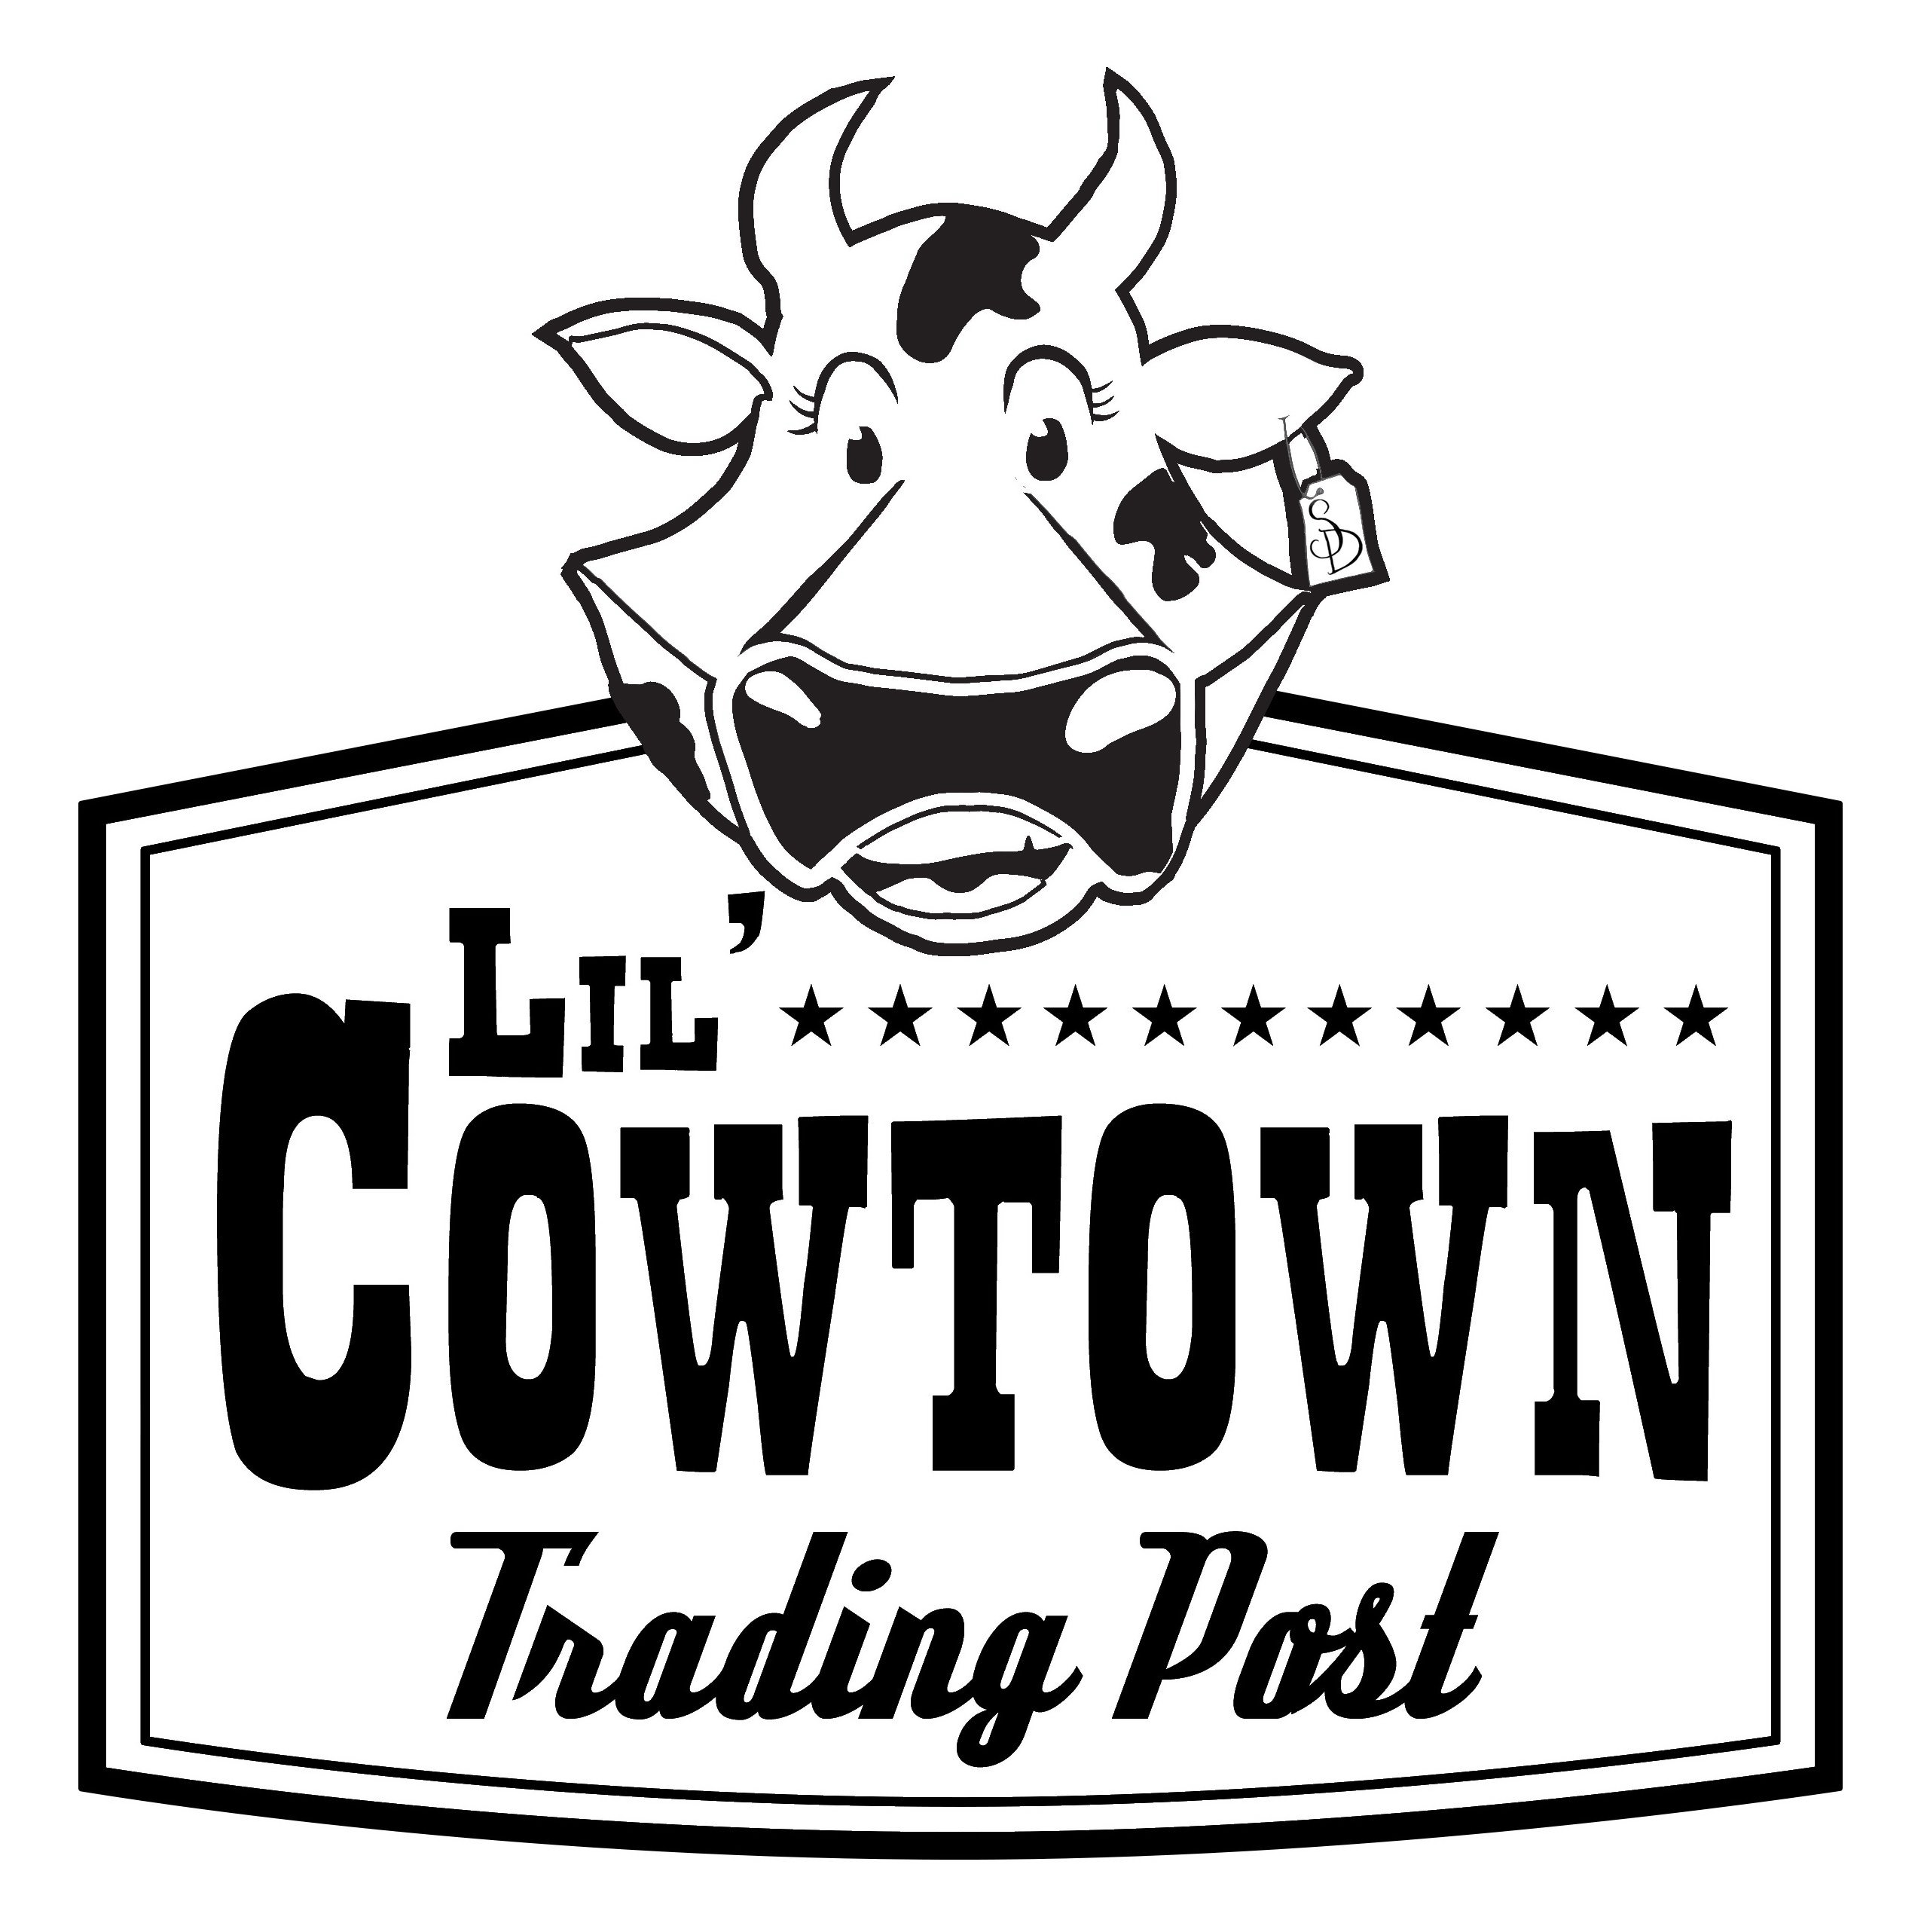  SD LIL' COWTOWN TRADING POST